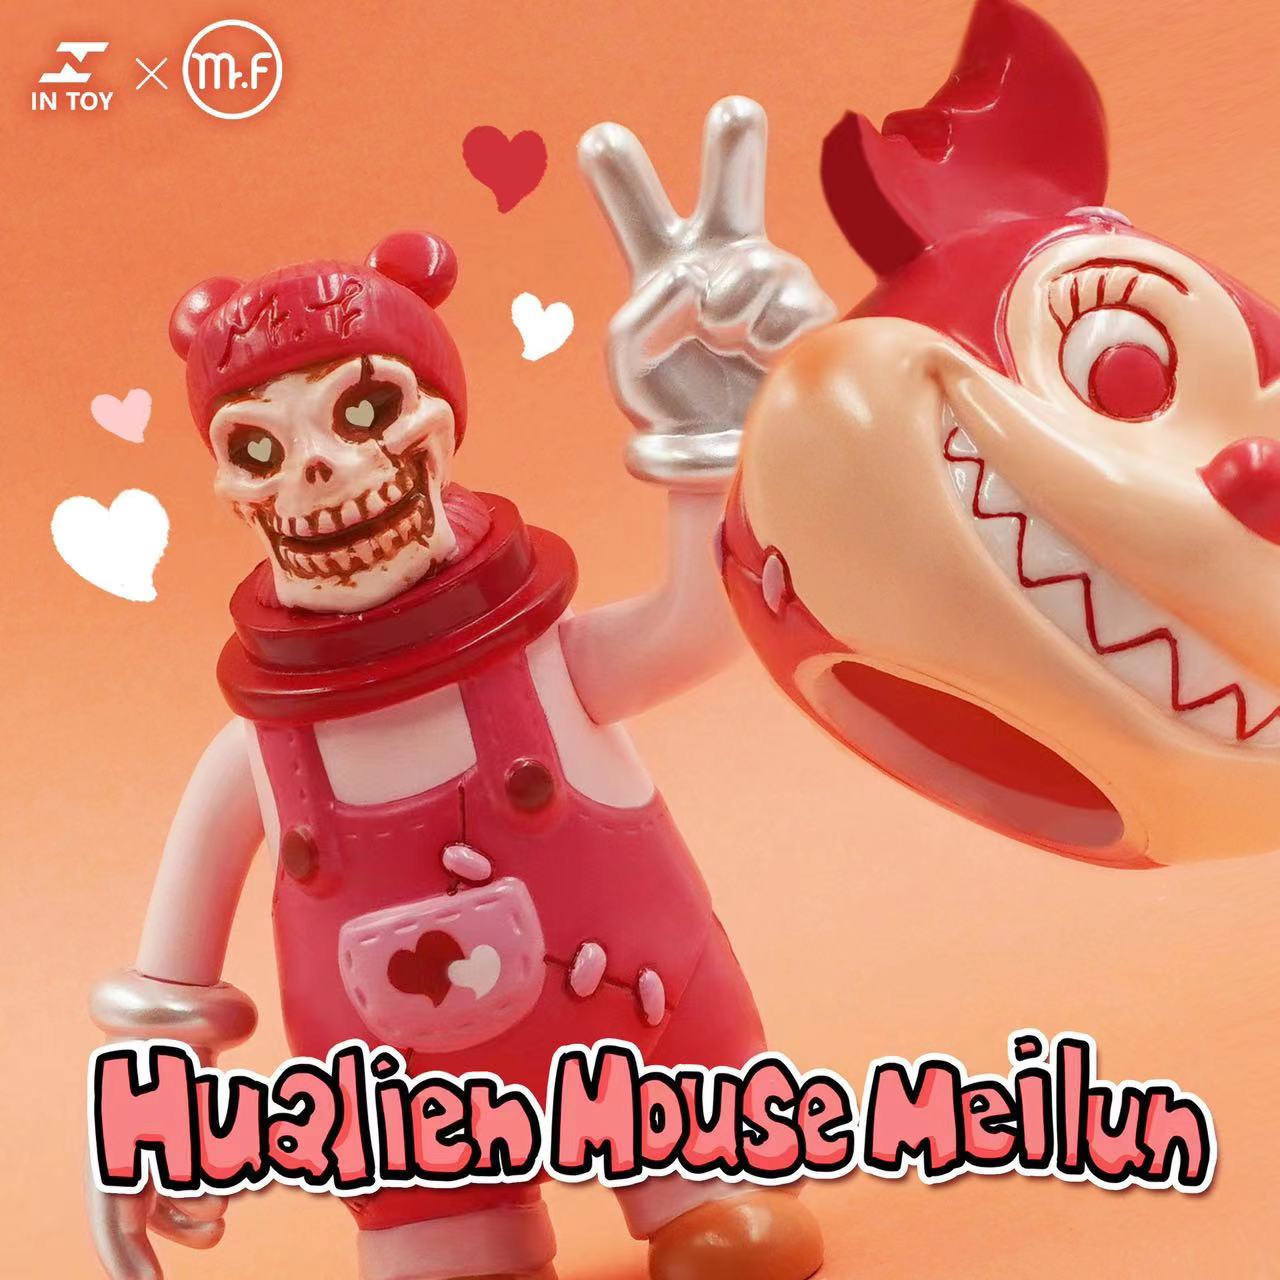 Hualien Mouse Meilun - Valentine's Day.Ver by INTOY X Mr. F